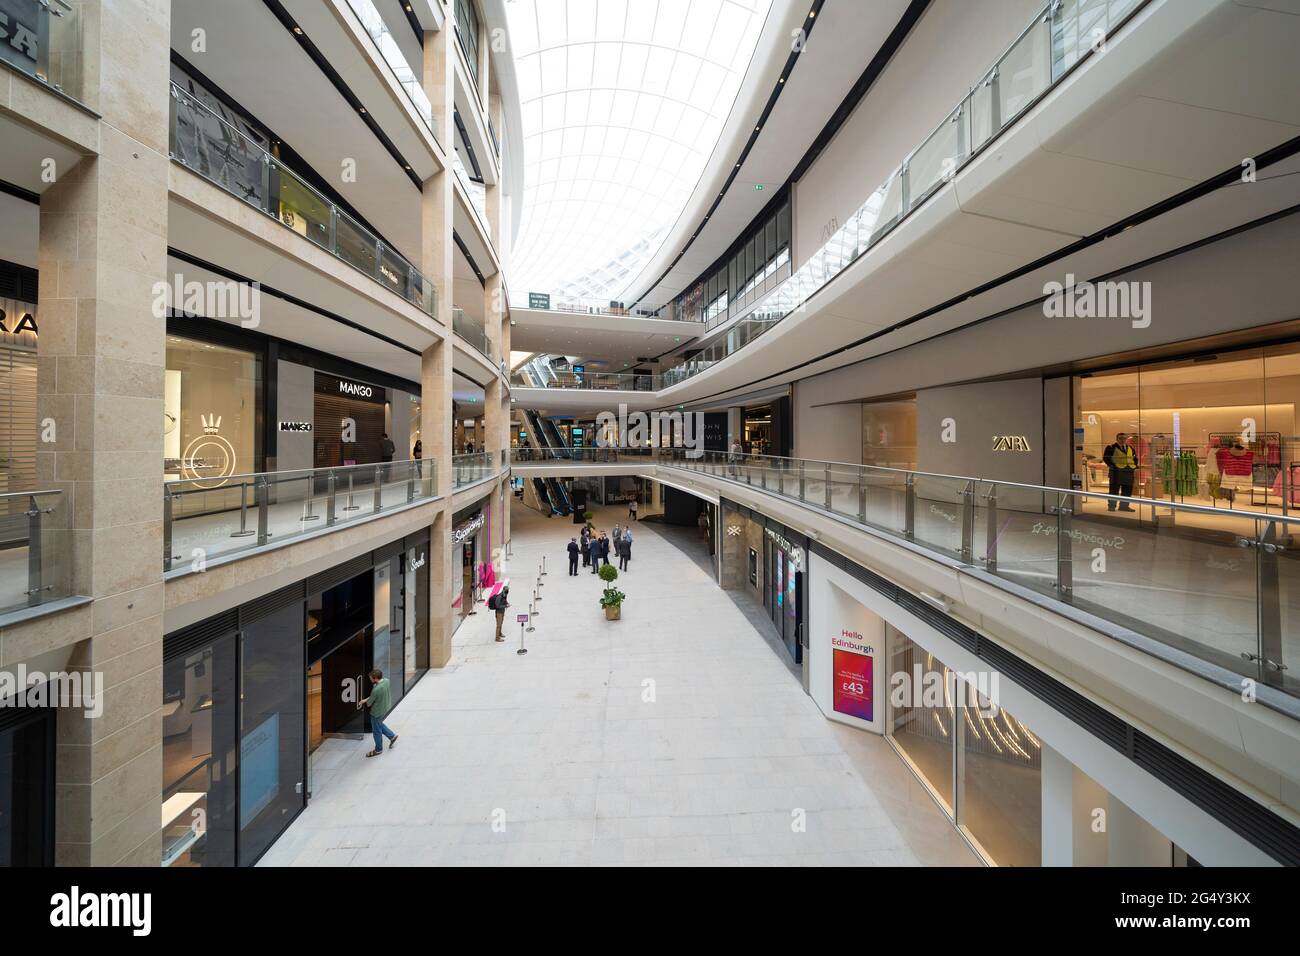 Edinburgh, Scotland, UK. 24 June 2021. First images of the new St James Quarter which opened this morning in Edinburgh. The large retail and residential complex replaced the St James Centre which occupied the site for many years. Iain Masterton/Alamy Live News Stock Photo